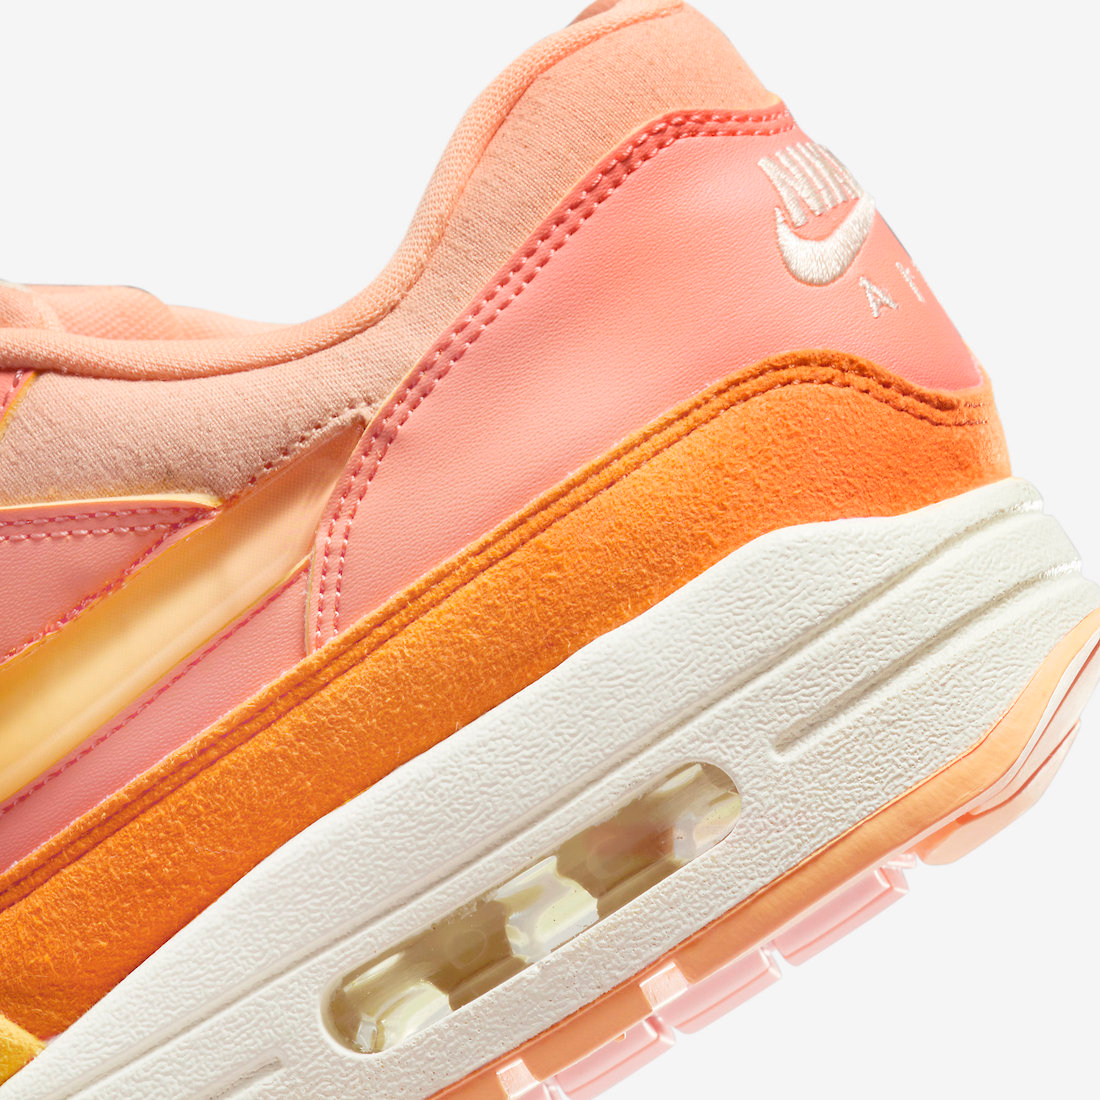 Nike-Air-Max-1-Puerto-Rico-Orange-Frost-Release-Date-8